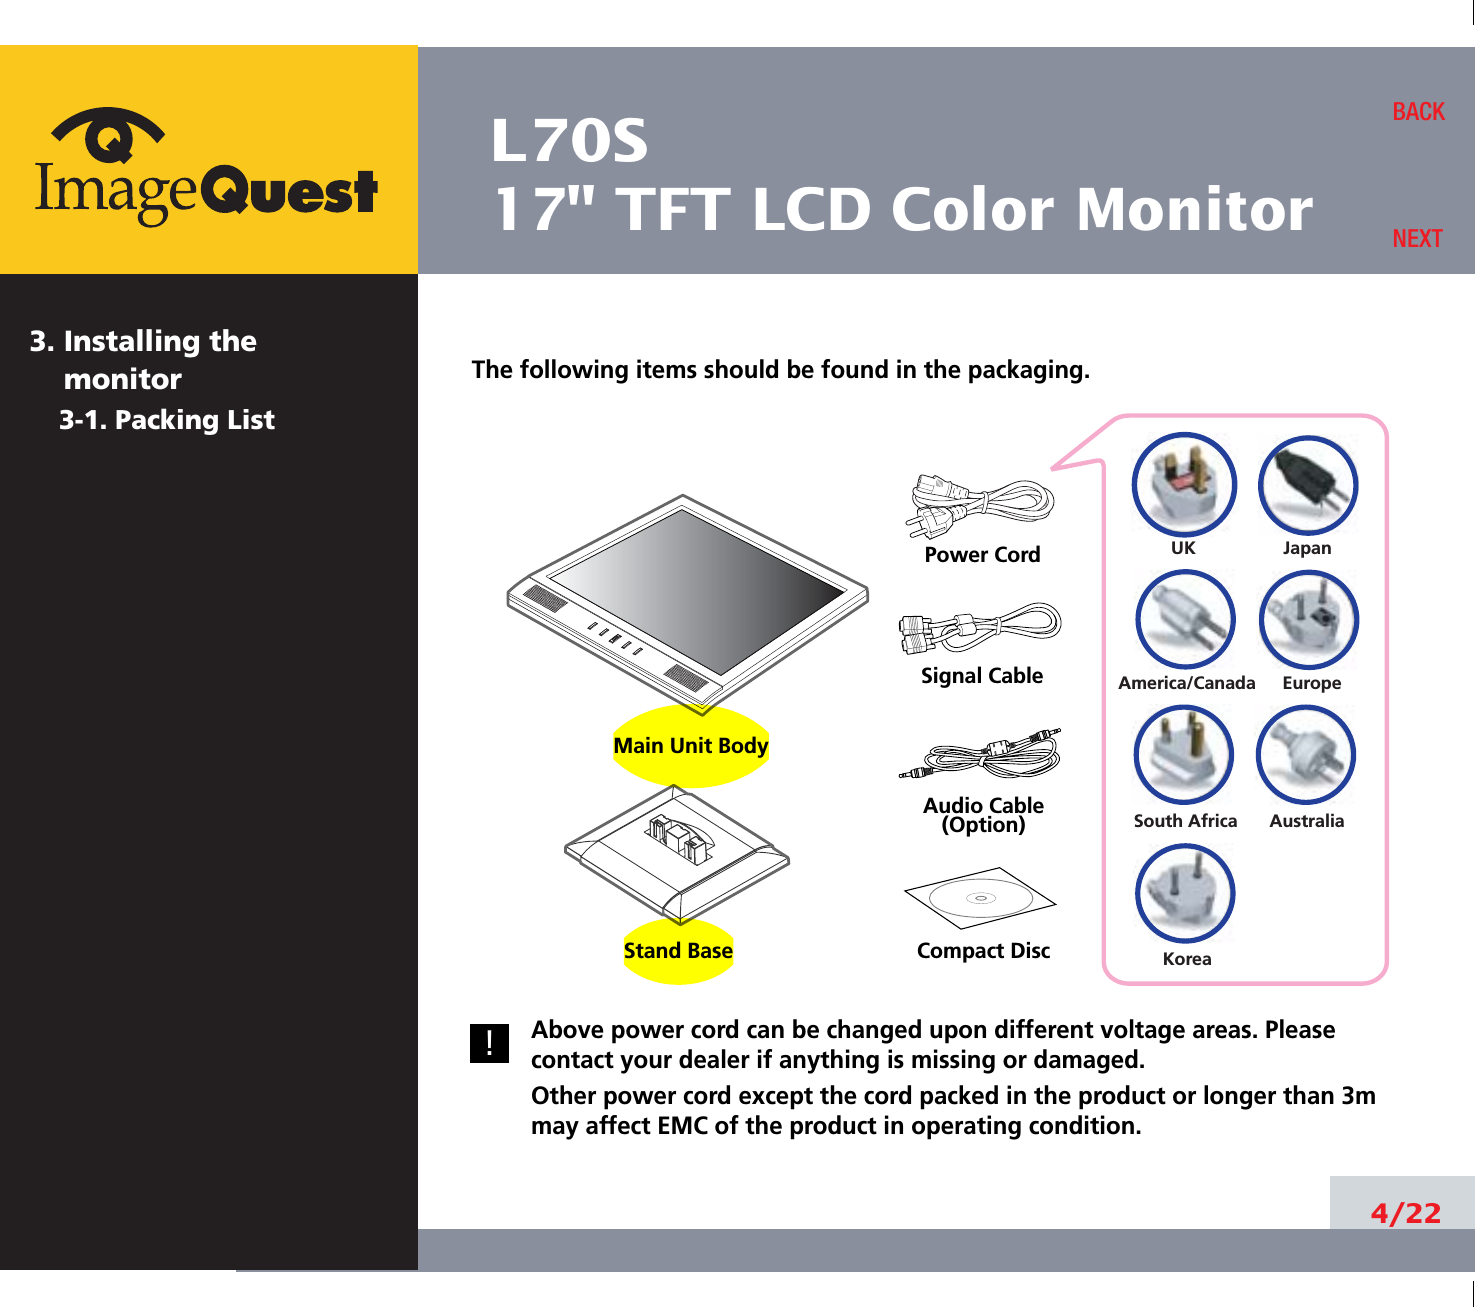 L70S17&quot; TFT LCD Color Monitor4/22BACKNEXTThe following items should be found in the packaging.Above power cord can be changed upon different voltage areas. Pleasecontact your dealer if anything is missing or damaged.Other power cord except the cord packed in the product or longer than 3mmay affect EMC of the product in operating condition.3. Installing the monitor3-1. Packing List!UKAmerica/CanadaJapanAustraliaKoreaEuropeSouth AfricaPower CordSignal CableAudio Cable(Option)Compact DiscStand BaseMain Unit Body